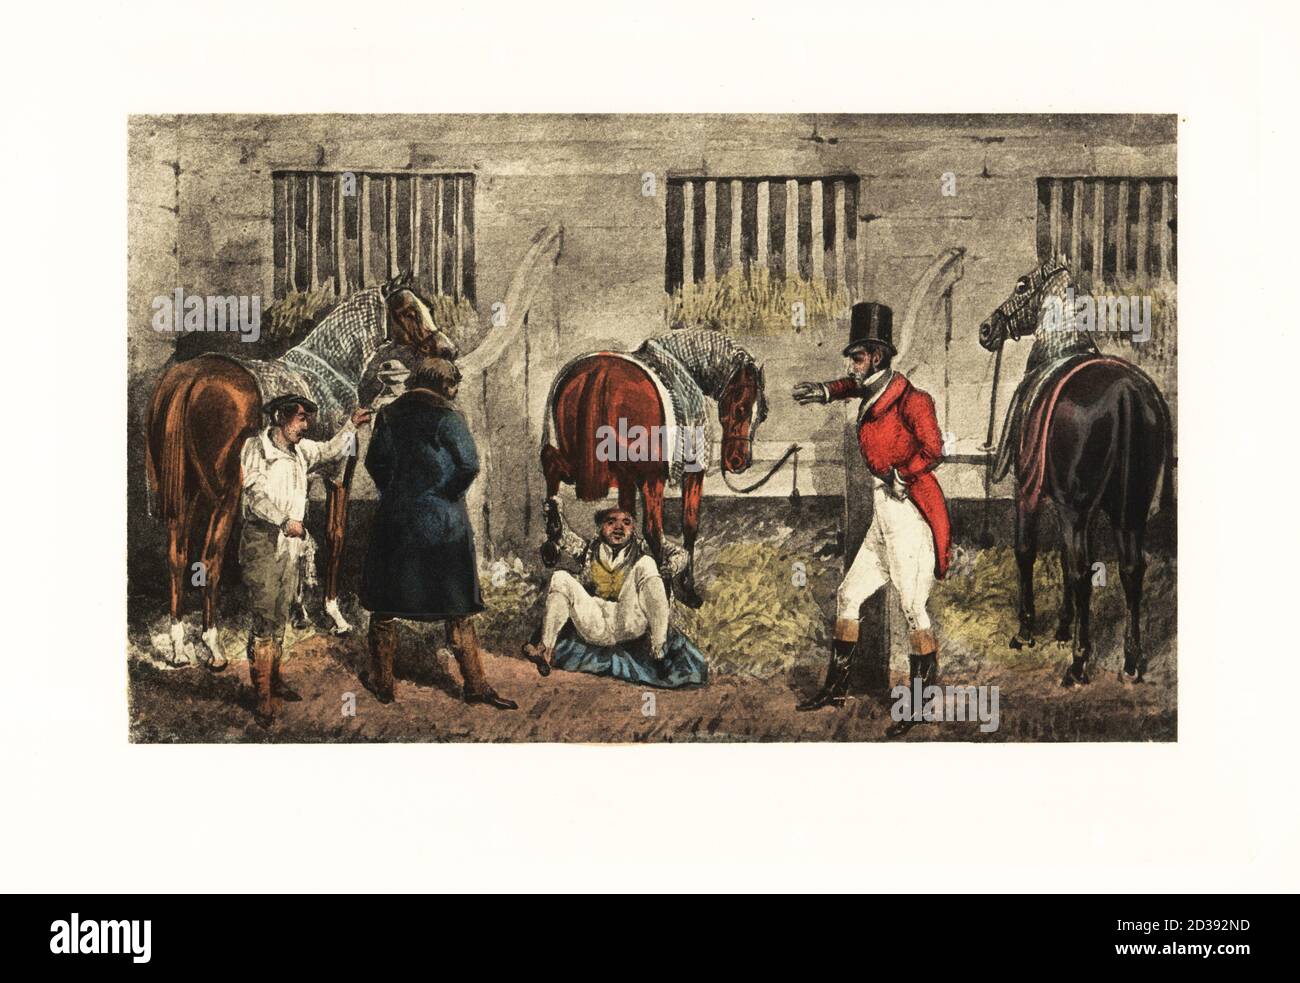 A drunken gentleman tries to put a race-horse’s hind feet in his dressing-gown pockets in the stables. A trainer and other gentlemen watch in horror. The Oaks filly. Chromolithographic facsimile of an illustration by Henry Thomas Alken from Memoirs of the Life of the Late John Mytton by Nimrod aka Charles James Apperley, Kegan Paul, London, 1900. Stock Photo